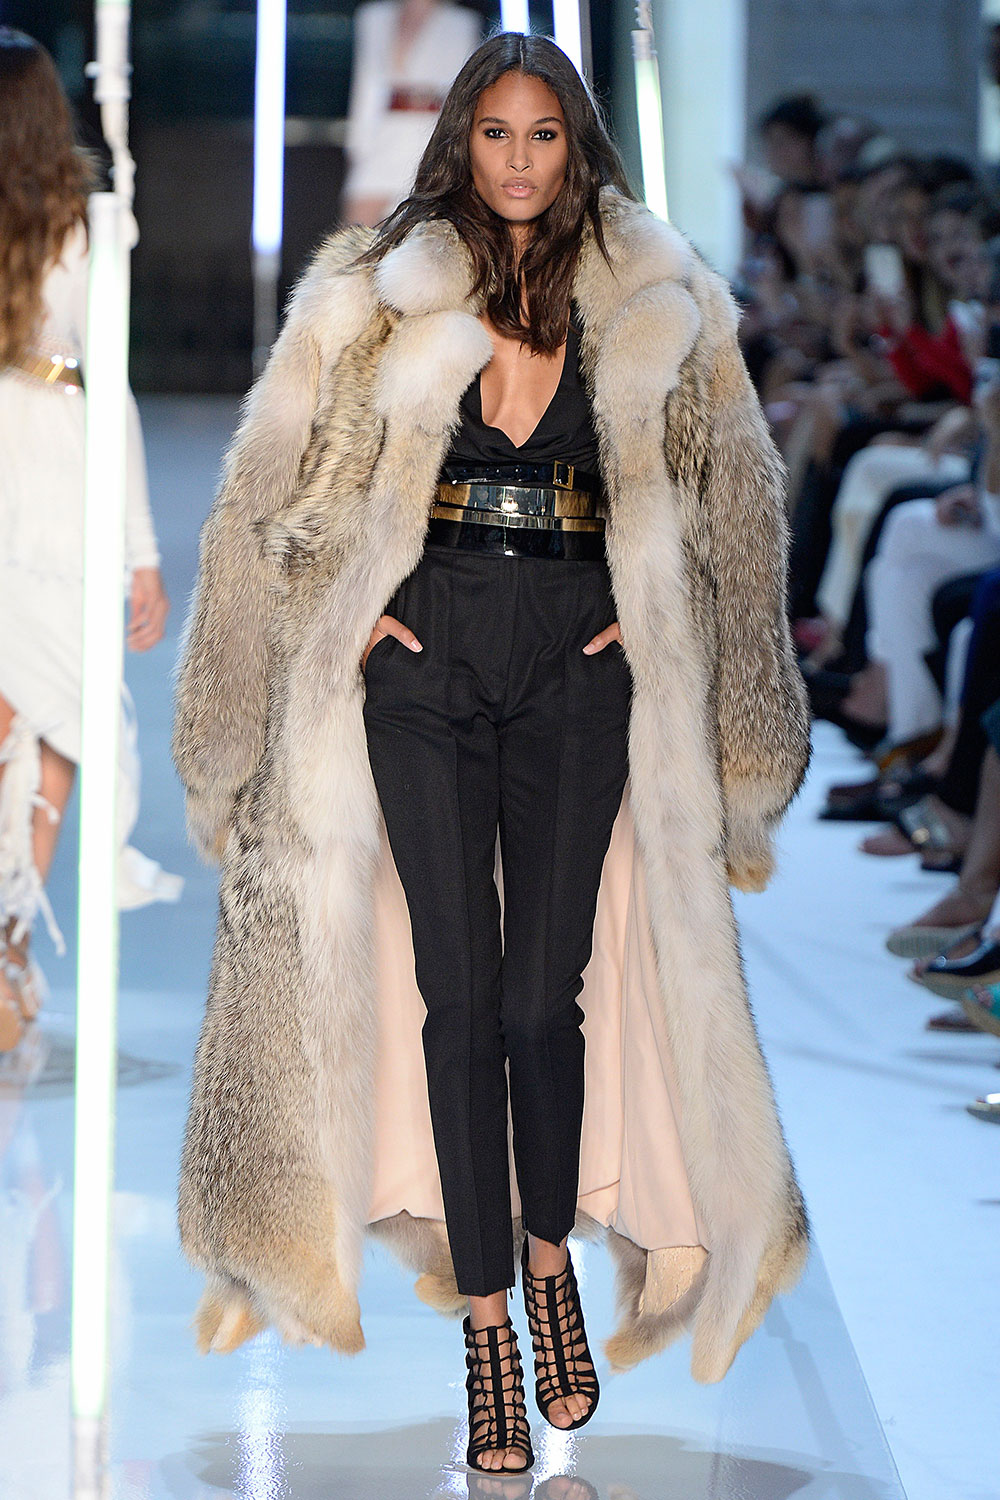 Look 13 from the Alexandre Vauthier show at Paris Fashion Week Haute Couture FW 2015/2016. Photo / Getty Images